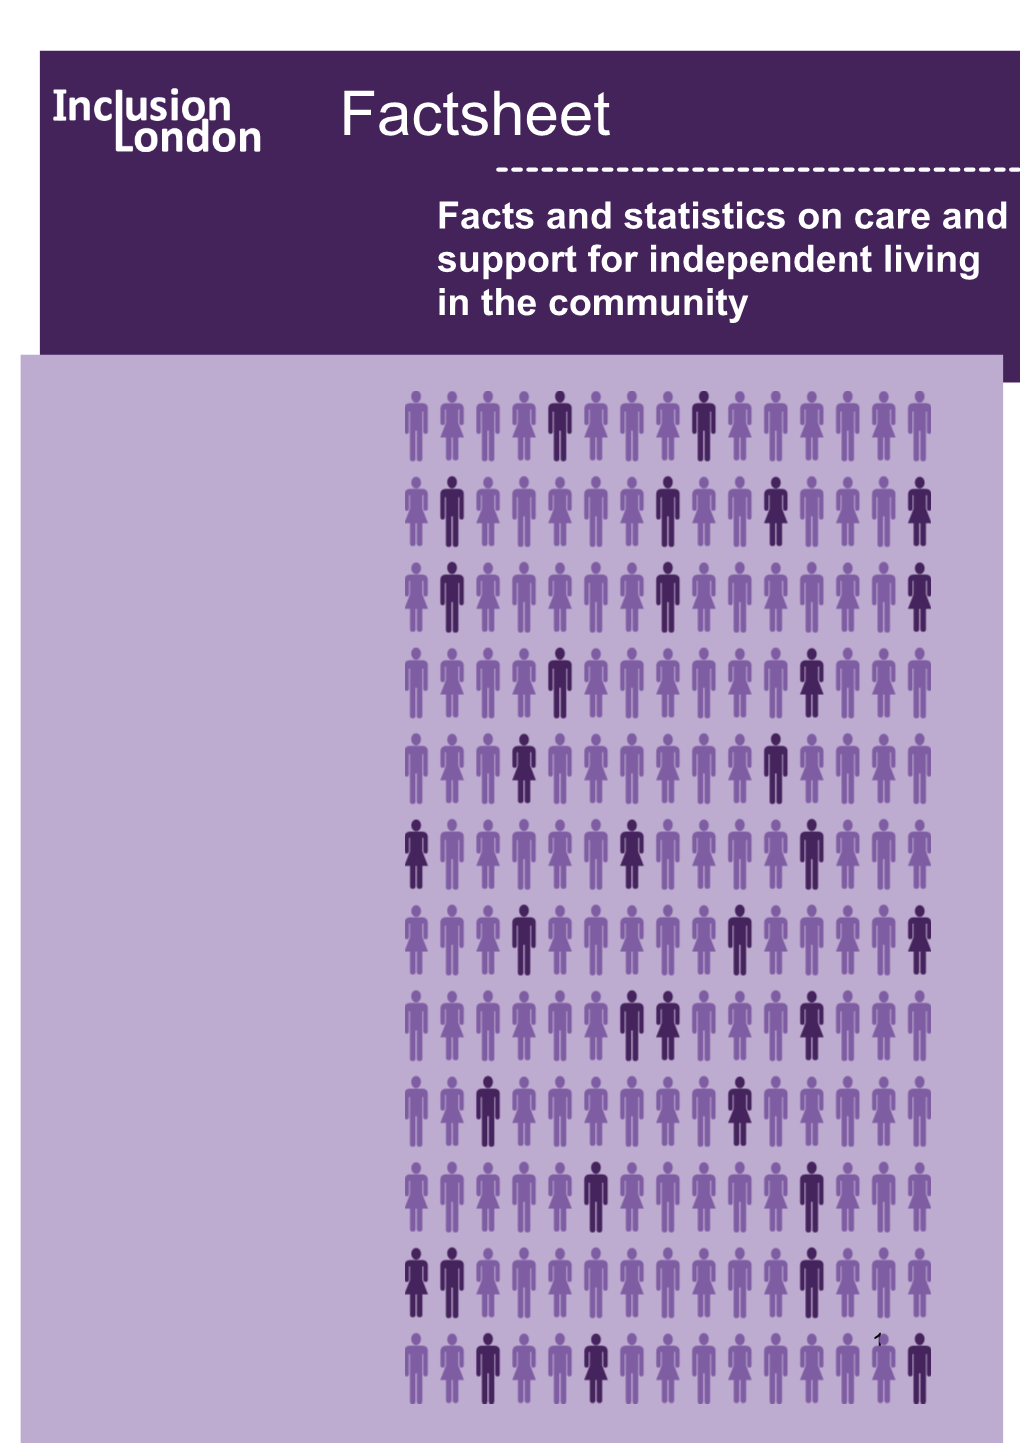 2. the Right to Independent Living